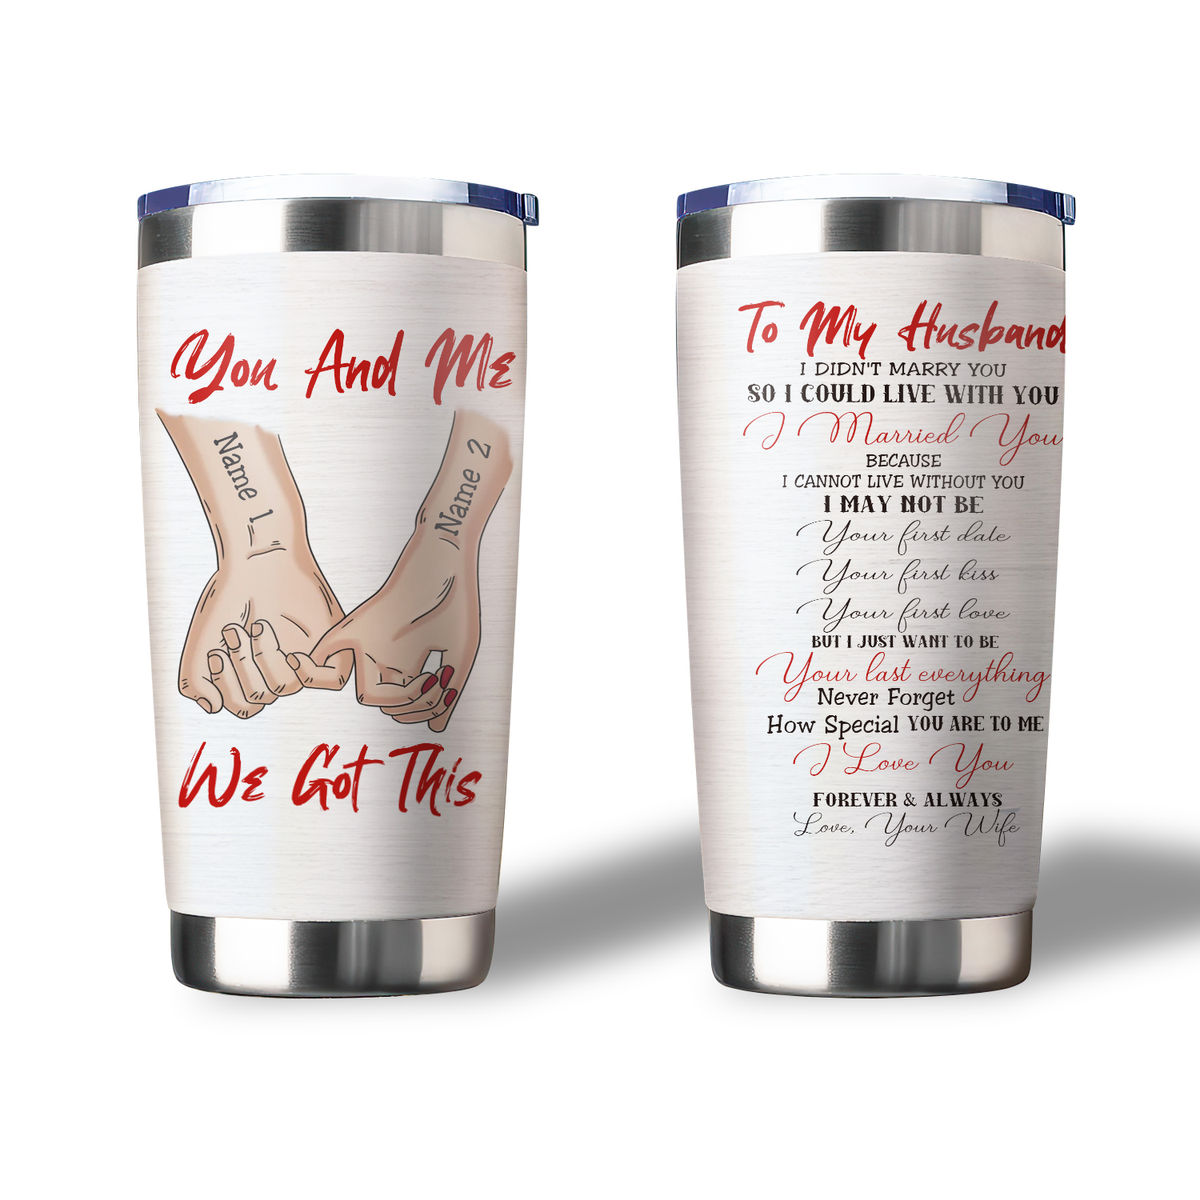 To My Husband - Gifts for Husband, Valentines Husband Gifts from Wife,  Husband Birthday Gift Ideas, Anniversary Fathers Day Husband Gifts, Husband  Tumbler for Coffee Work Car Travel 37455 37456